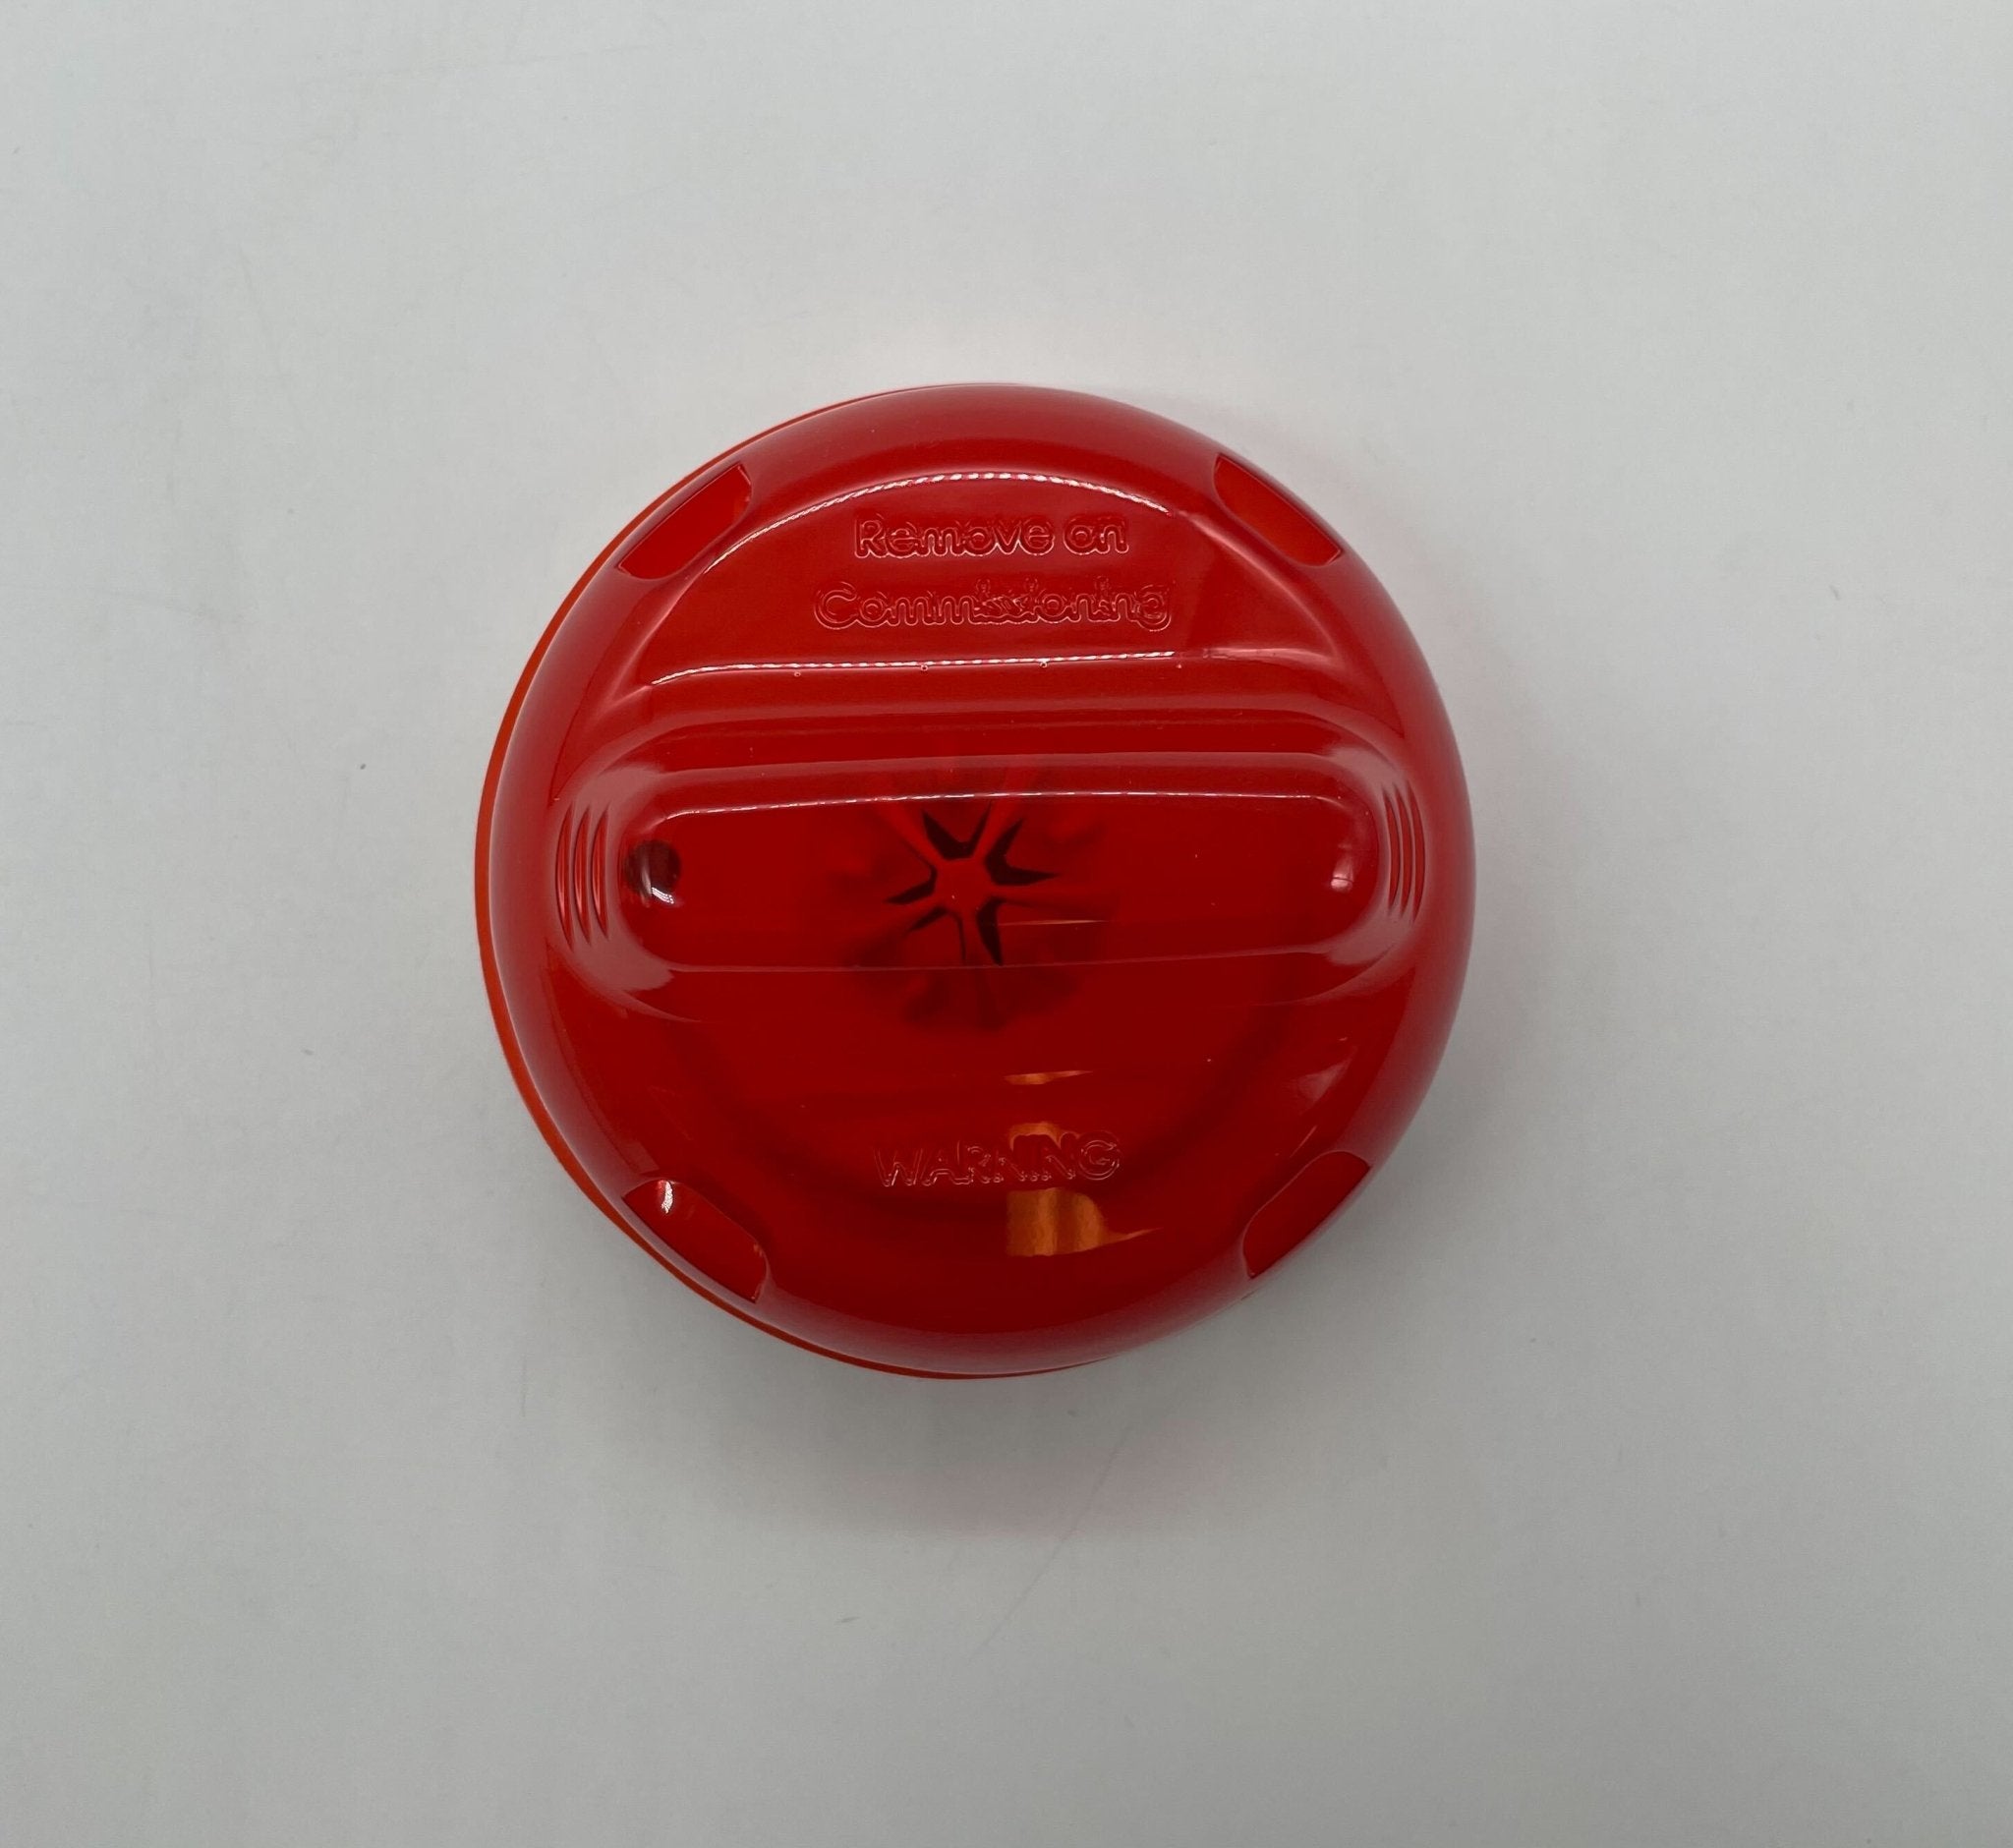 Potter PAD100-HD - The Fire Alarm Supplier